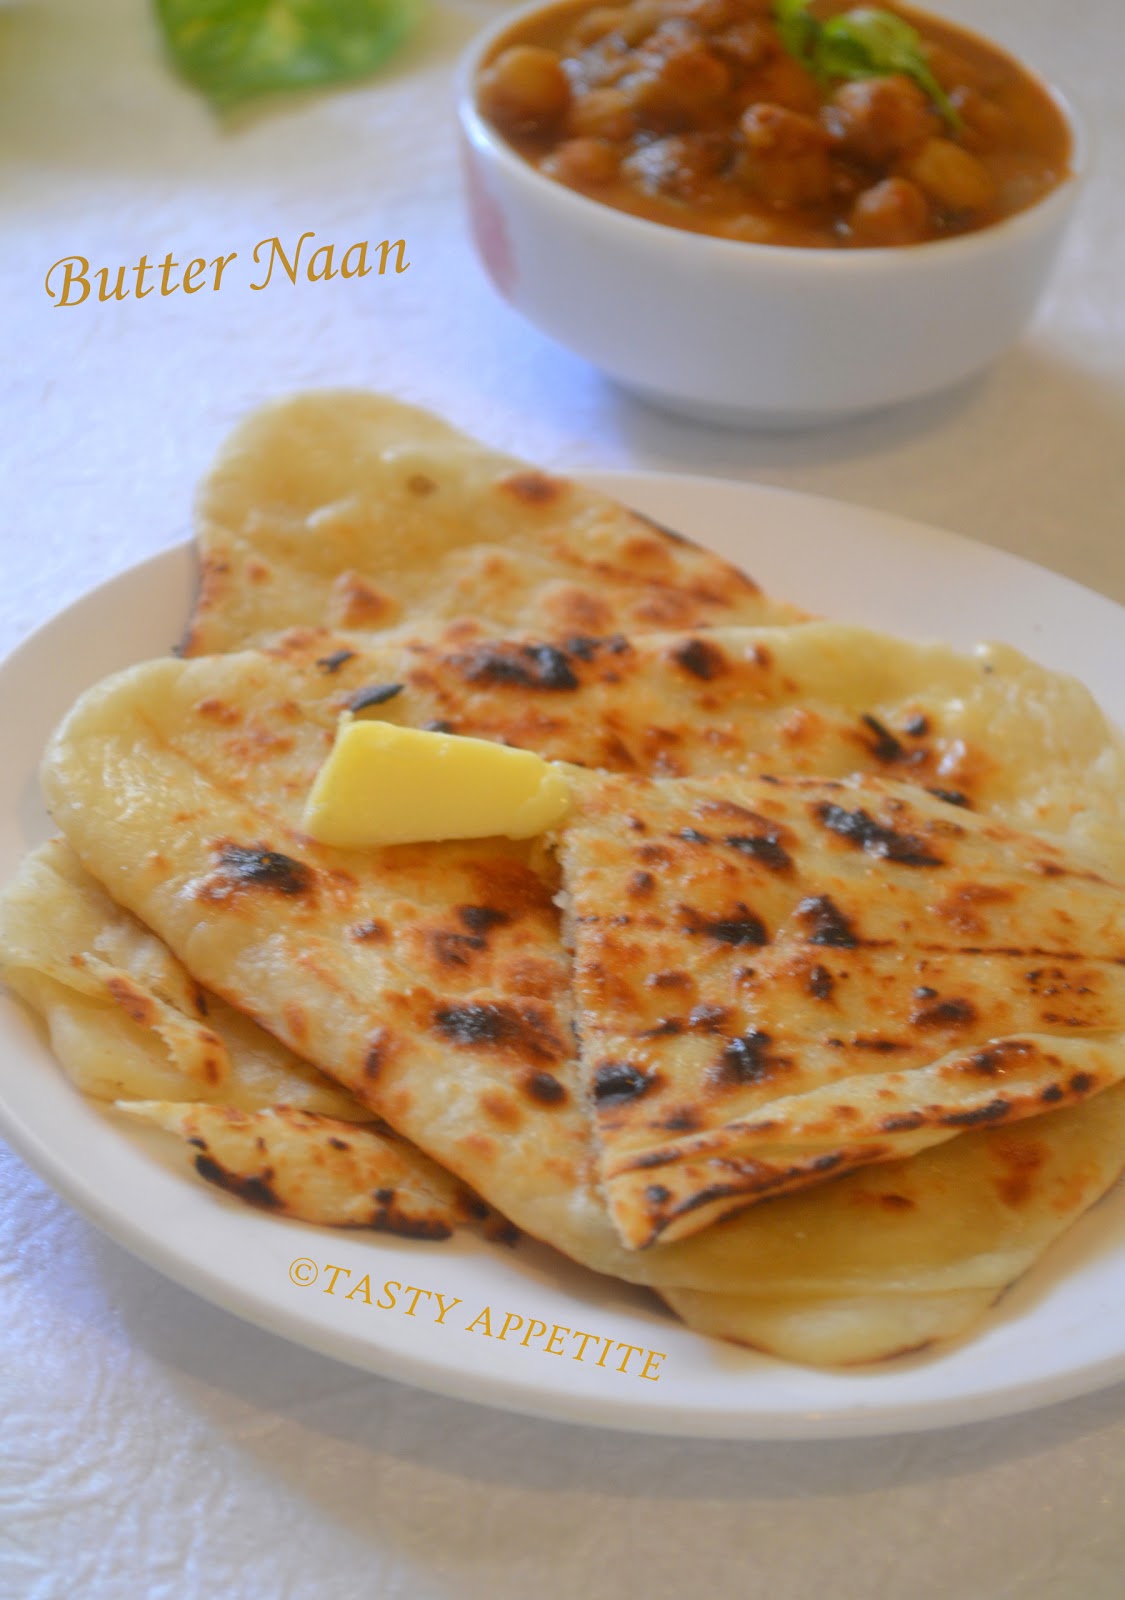 home roti  make to butter how Tasty home: Naan make  Butter at  at / Naan to naan How Appetite